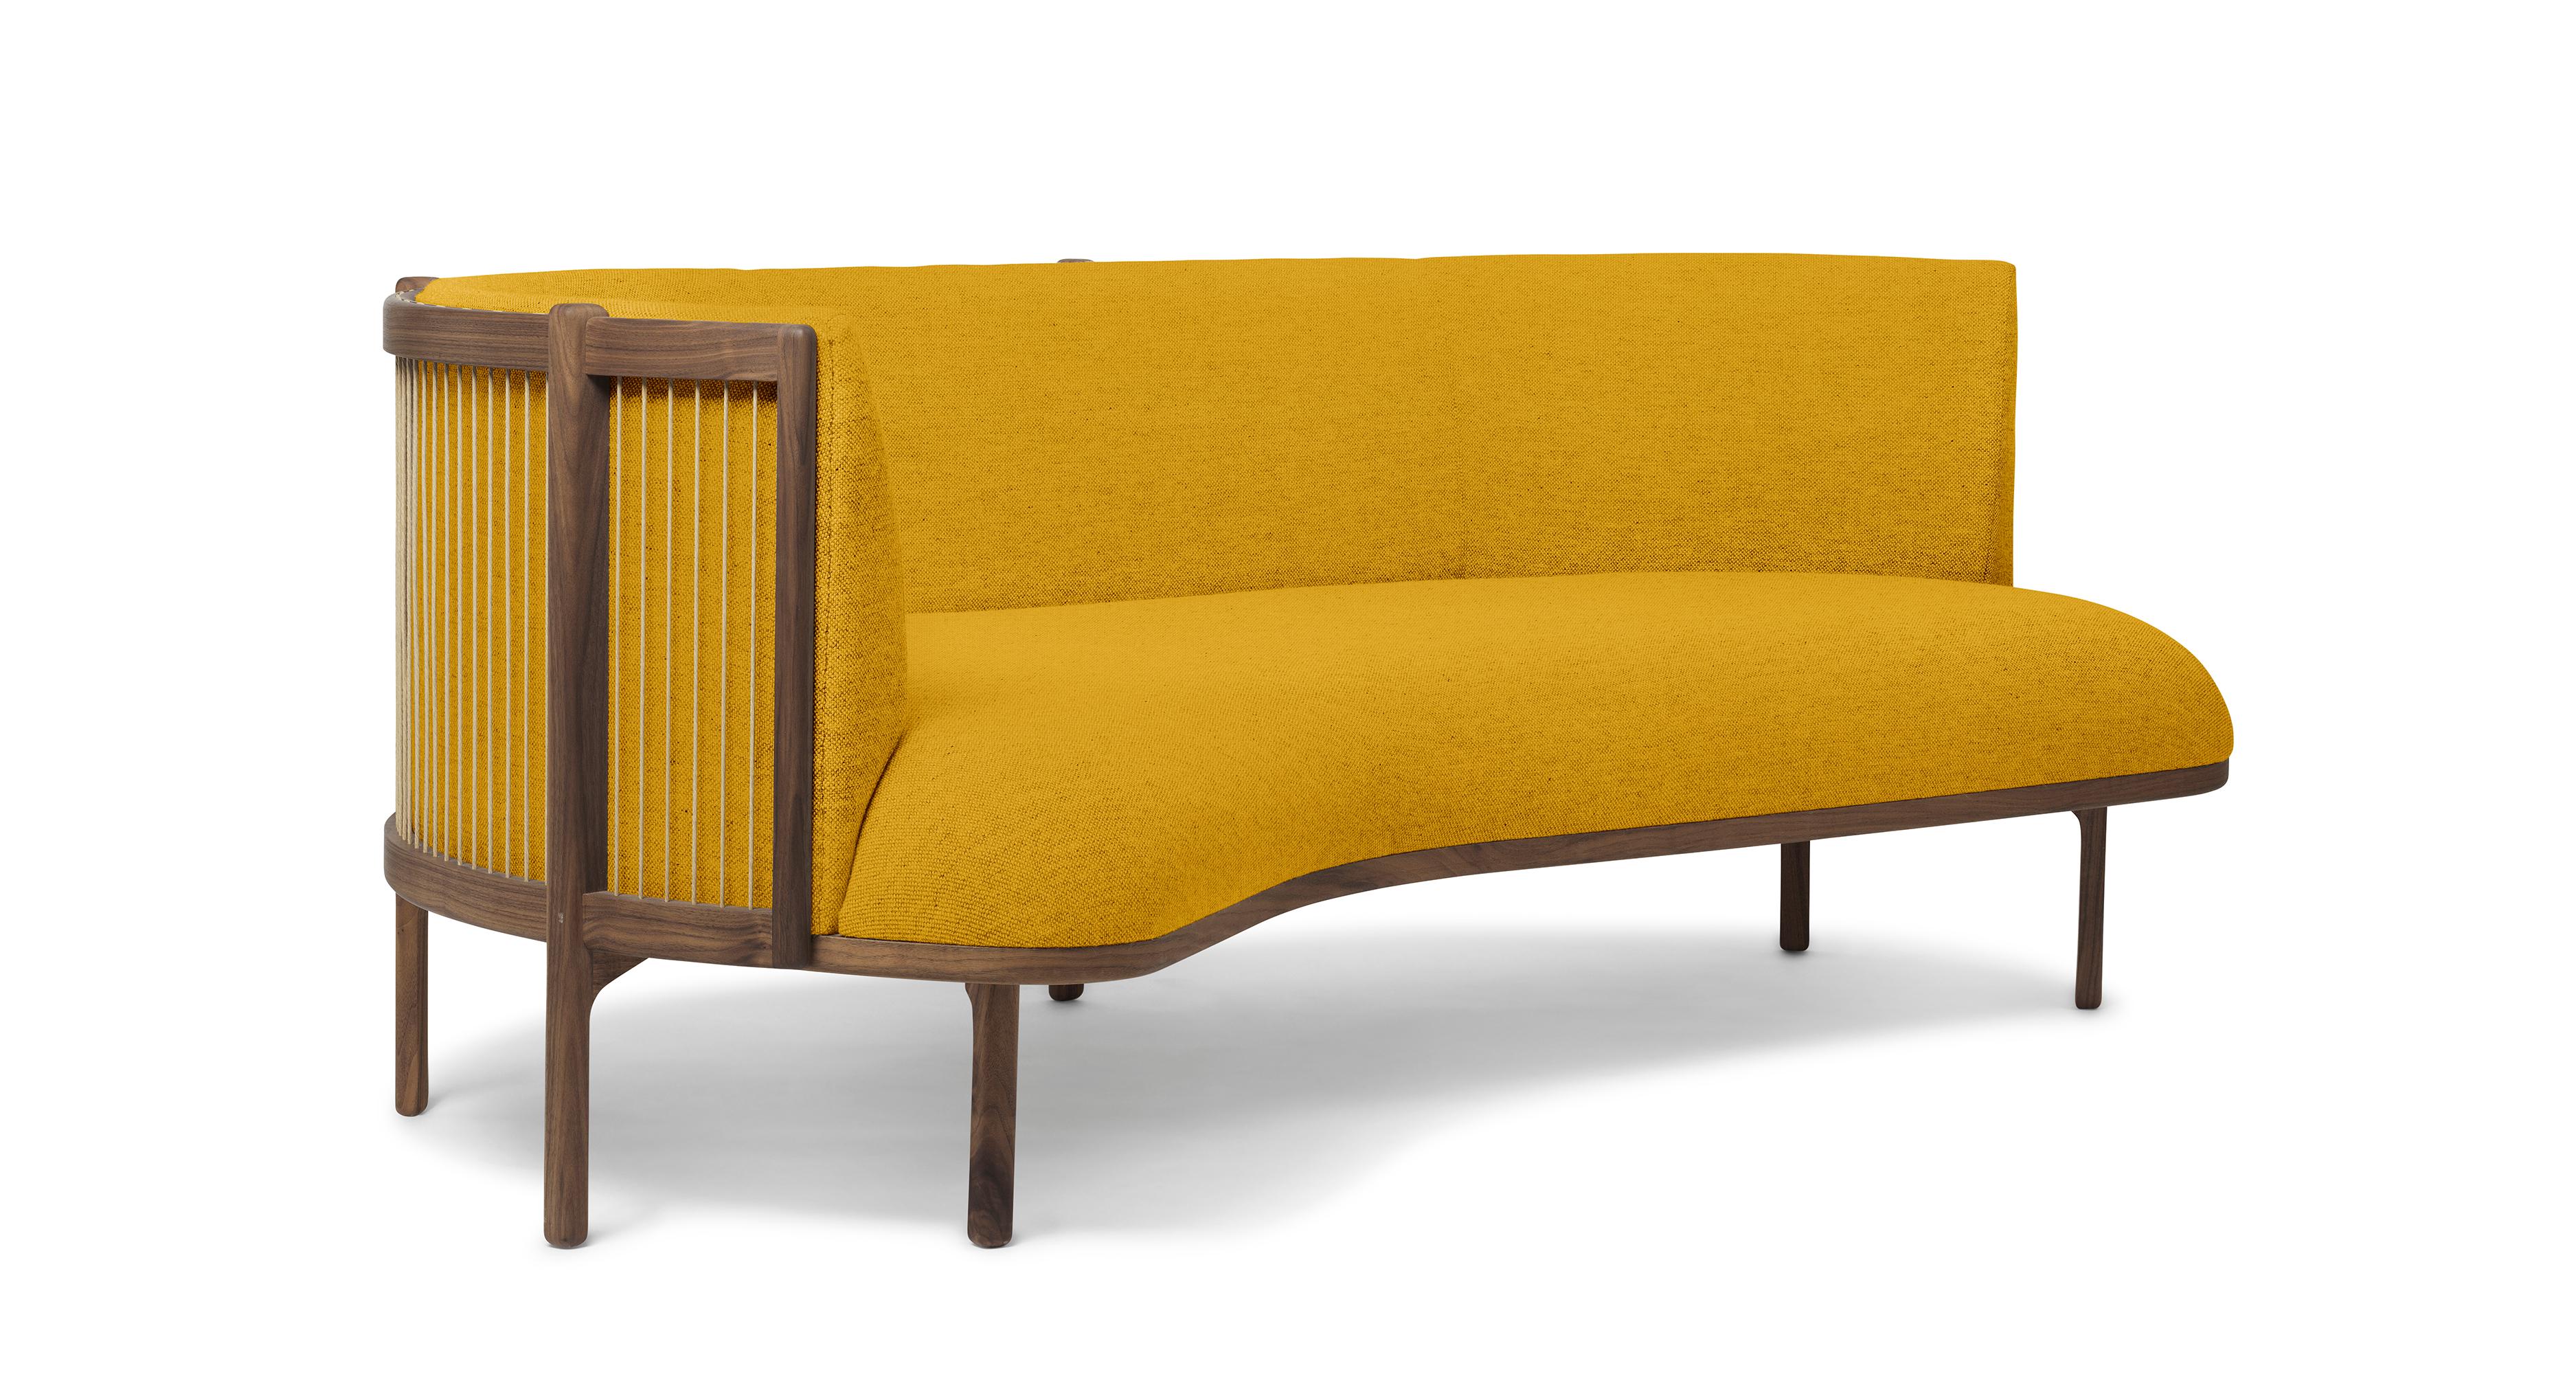 The sideways sofa from Rikke Frost combines Classic materials - wood, paper cord, and high-quality upholstery textile - with a modern asymmetric shape. The steam-bent backrest is shaped from solid wood and woven paper cord for a light, elegant